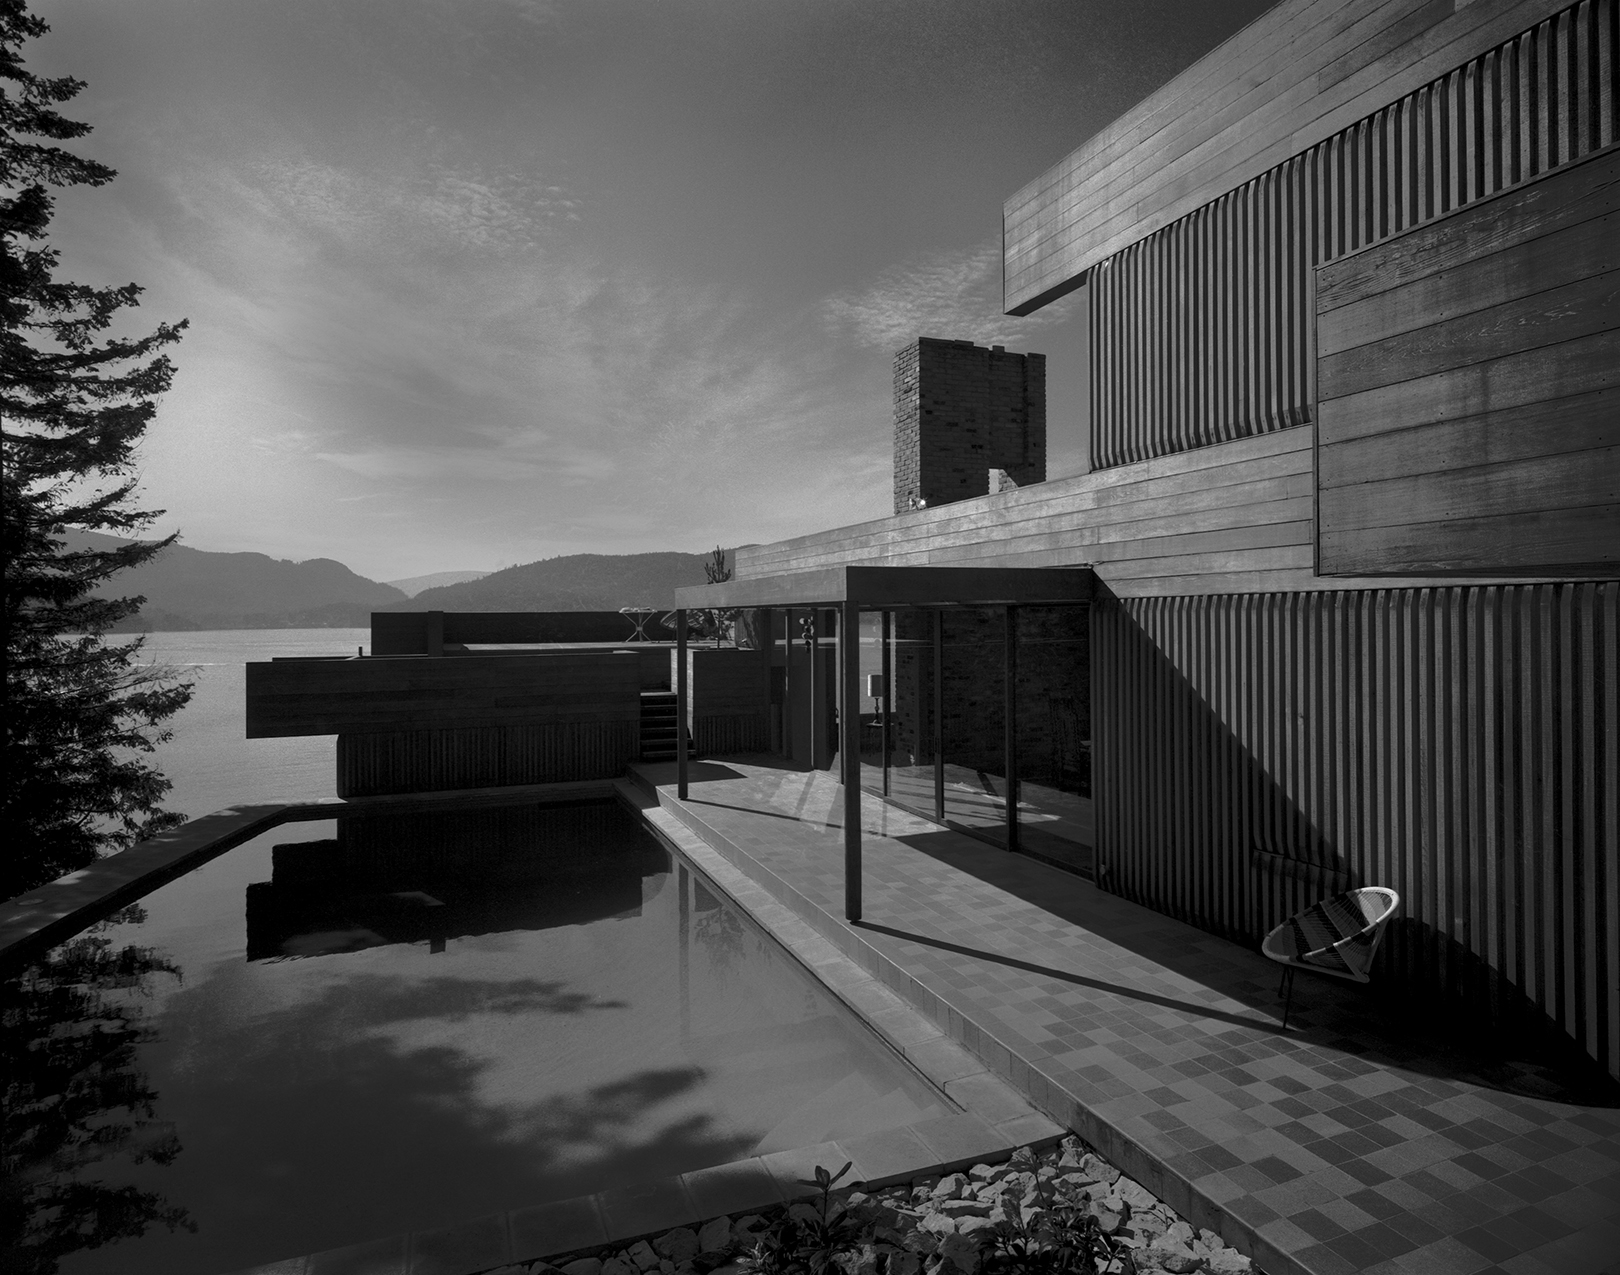 Graham Residence, Erickson/ Massey Architects, 1962. Photo: John Fulker, 1967. Collection of West Vancouver Art Museum.